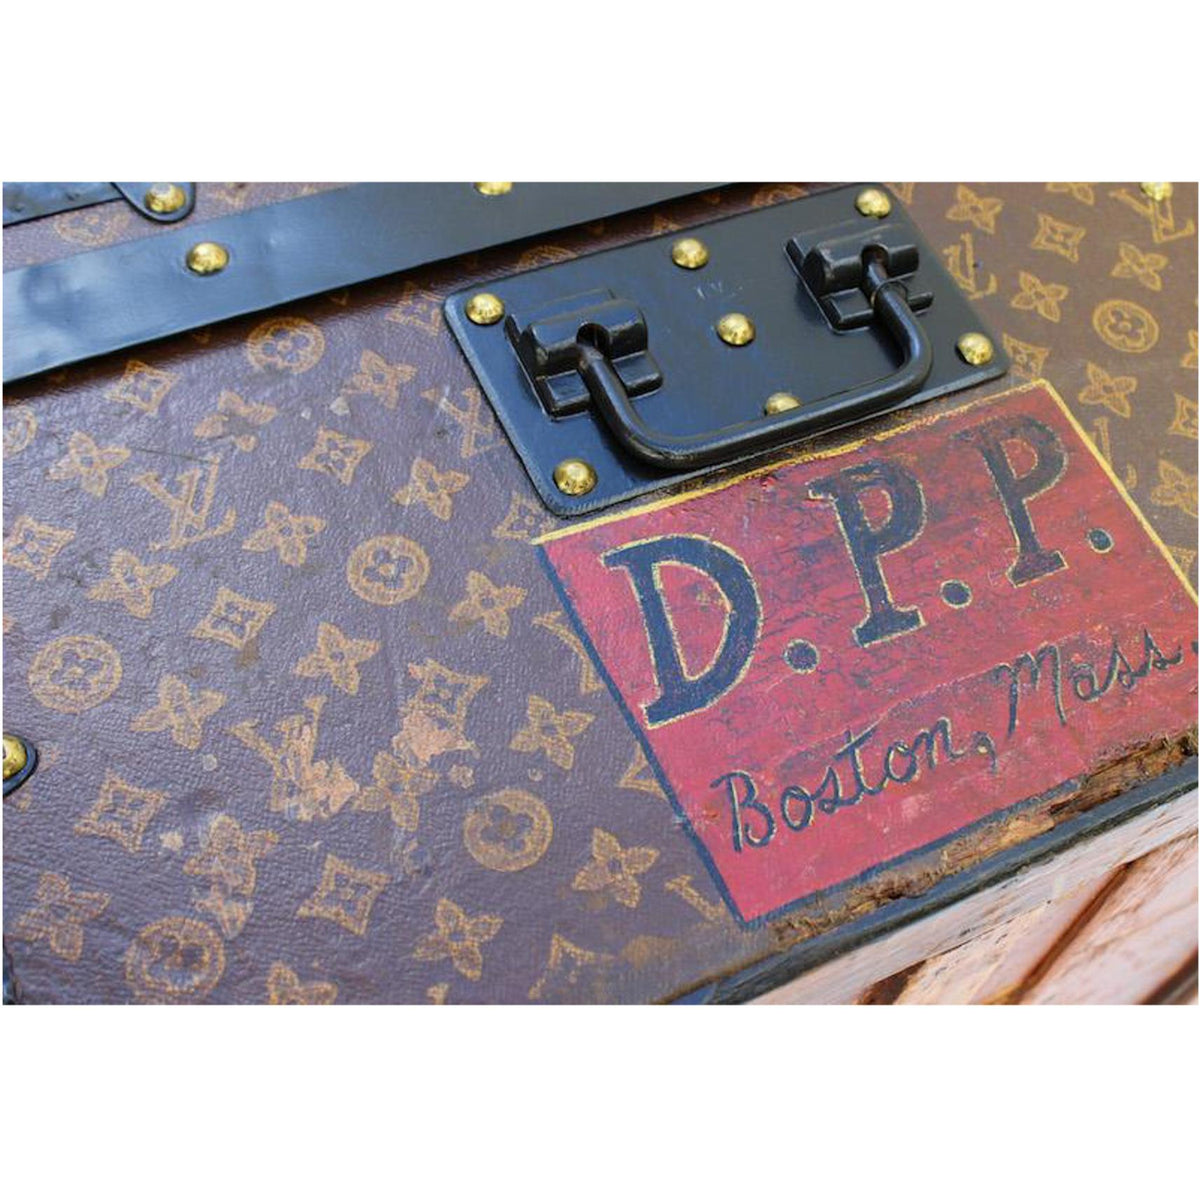 Cabin Trunk with D.P.P initials